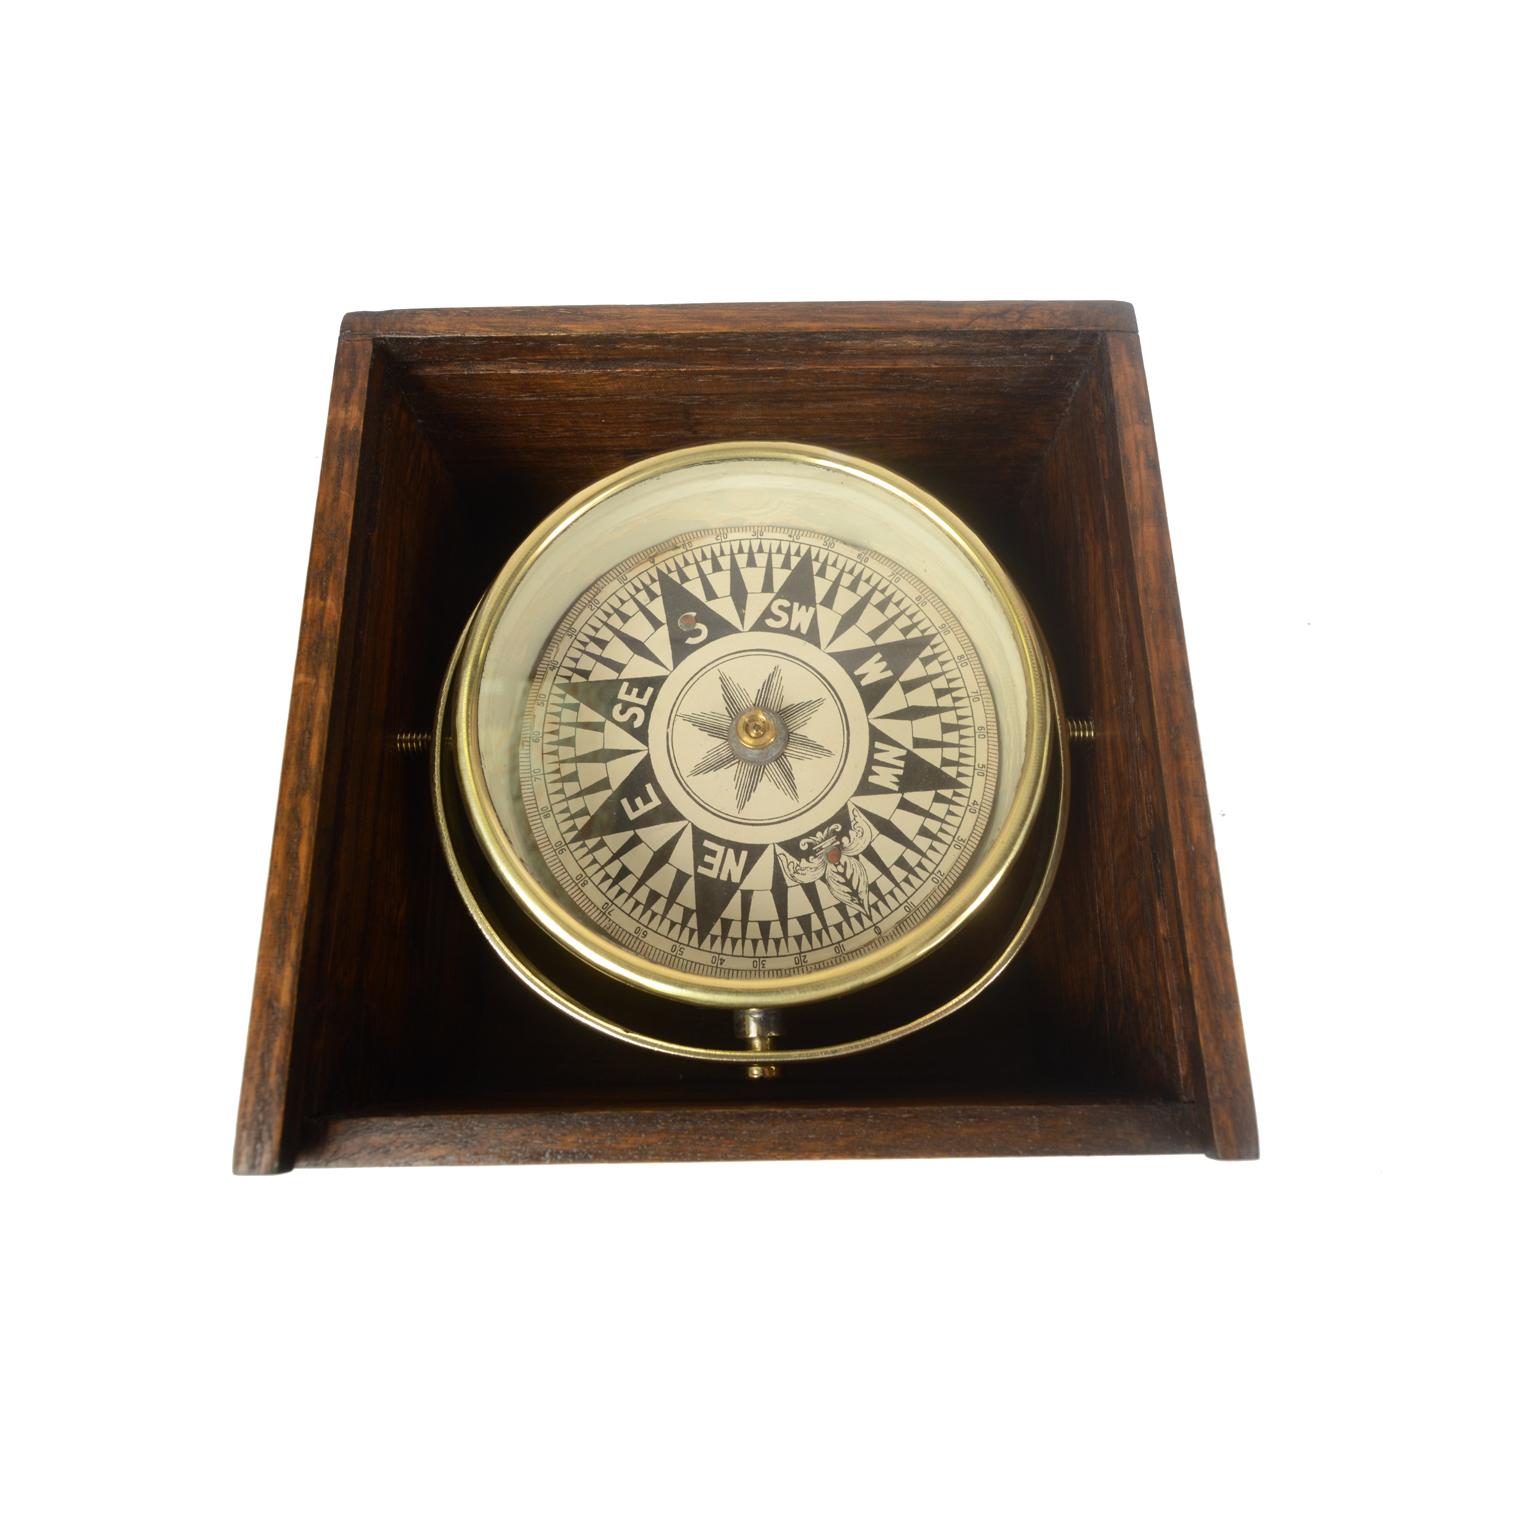 Dry compass in its original wooden box with slot lid. English manufacture from the second half of the 19th century. The compass consists of a brass and glass vessel on the bottom of which a metal stem is fixed on which the eight-wind compass card of